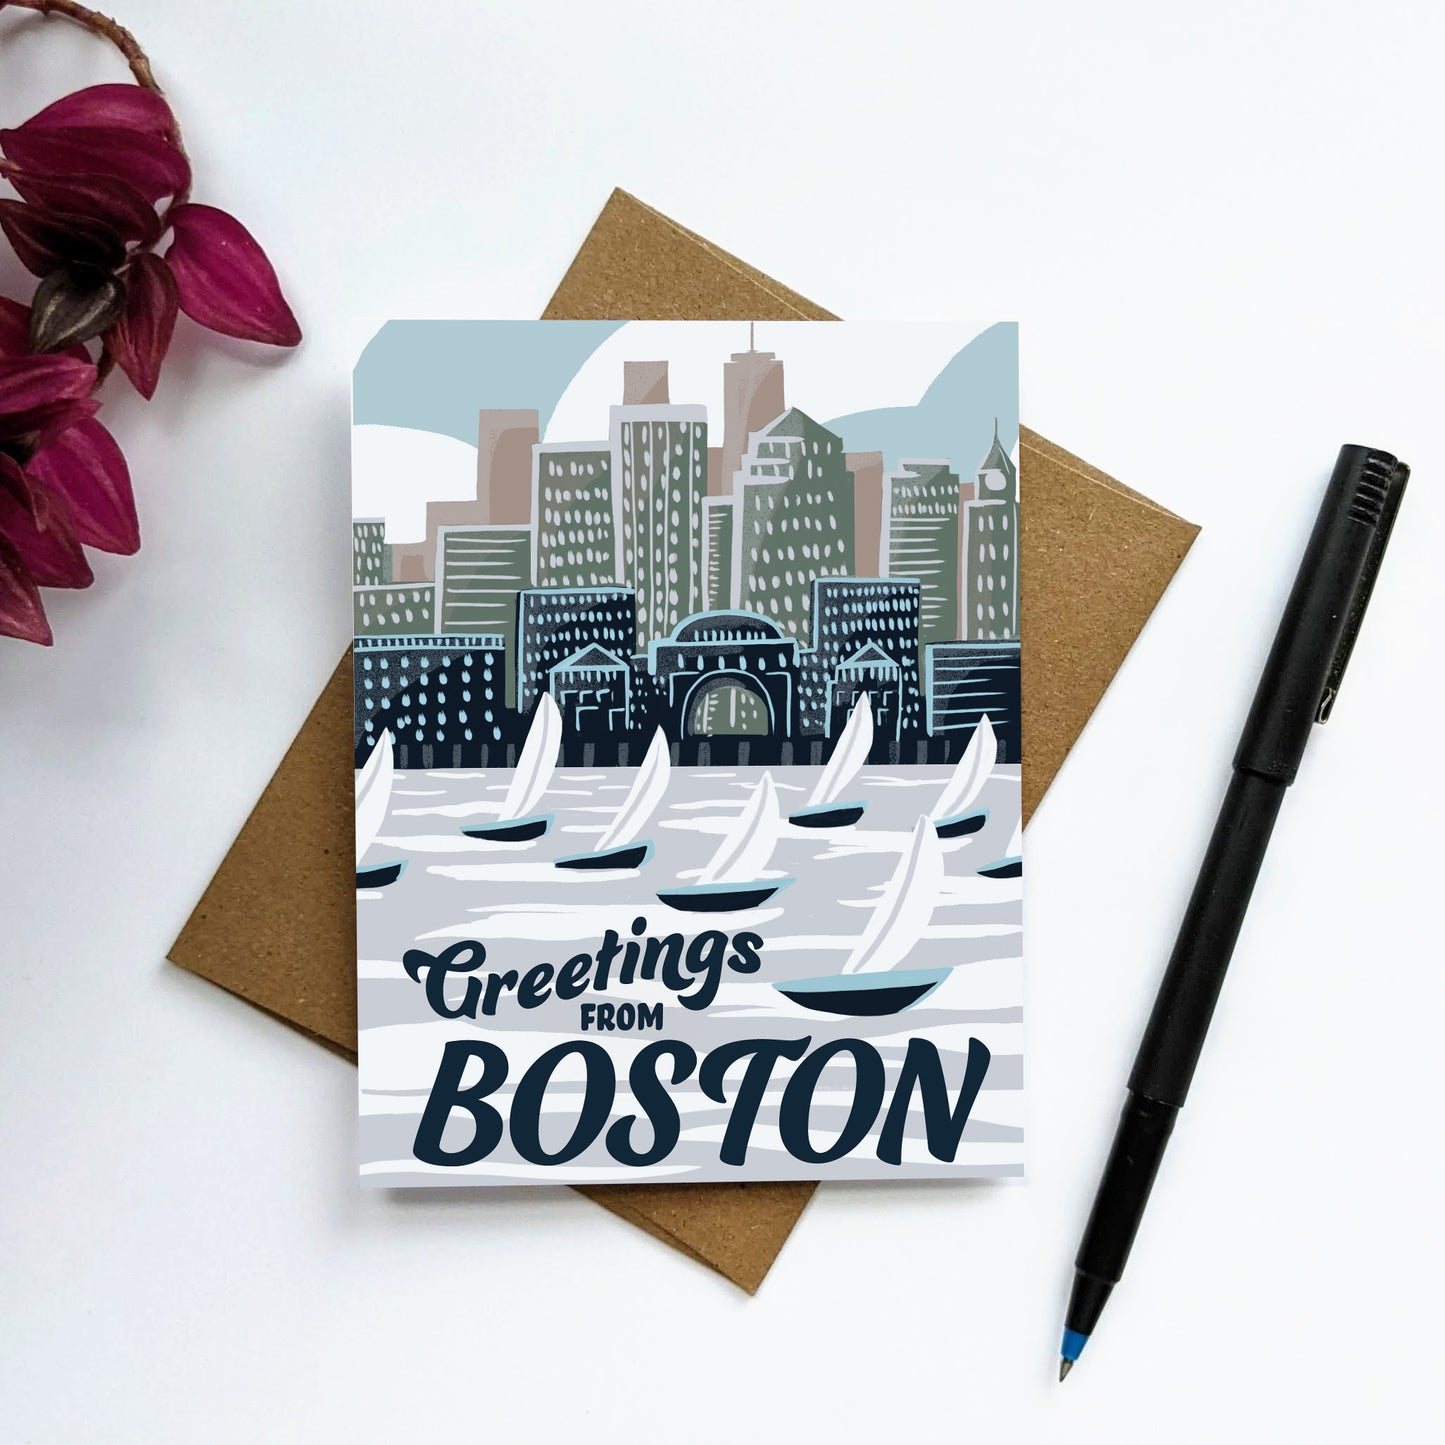 "Greetings from Boston" Greeting Card